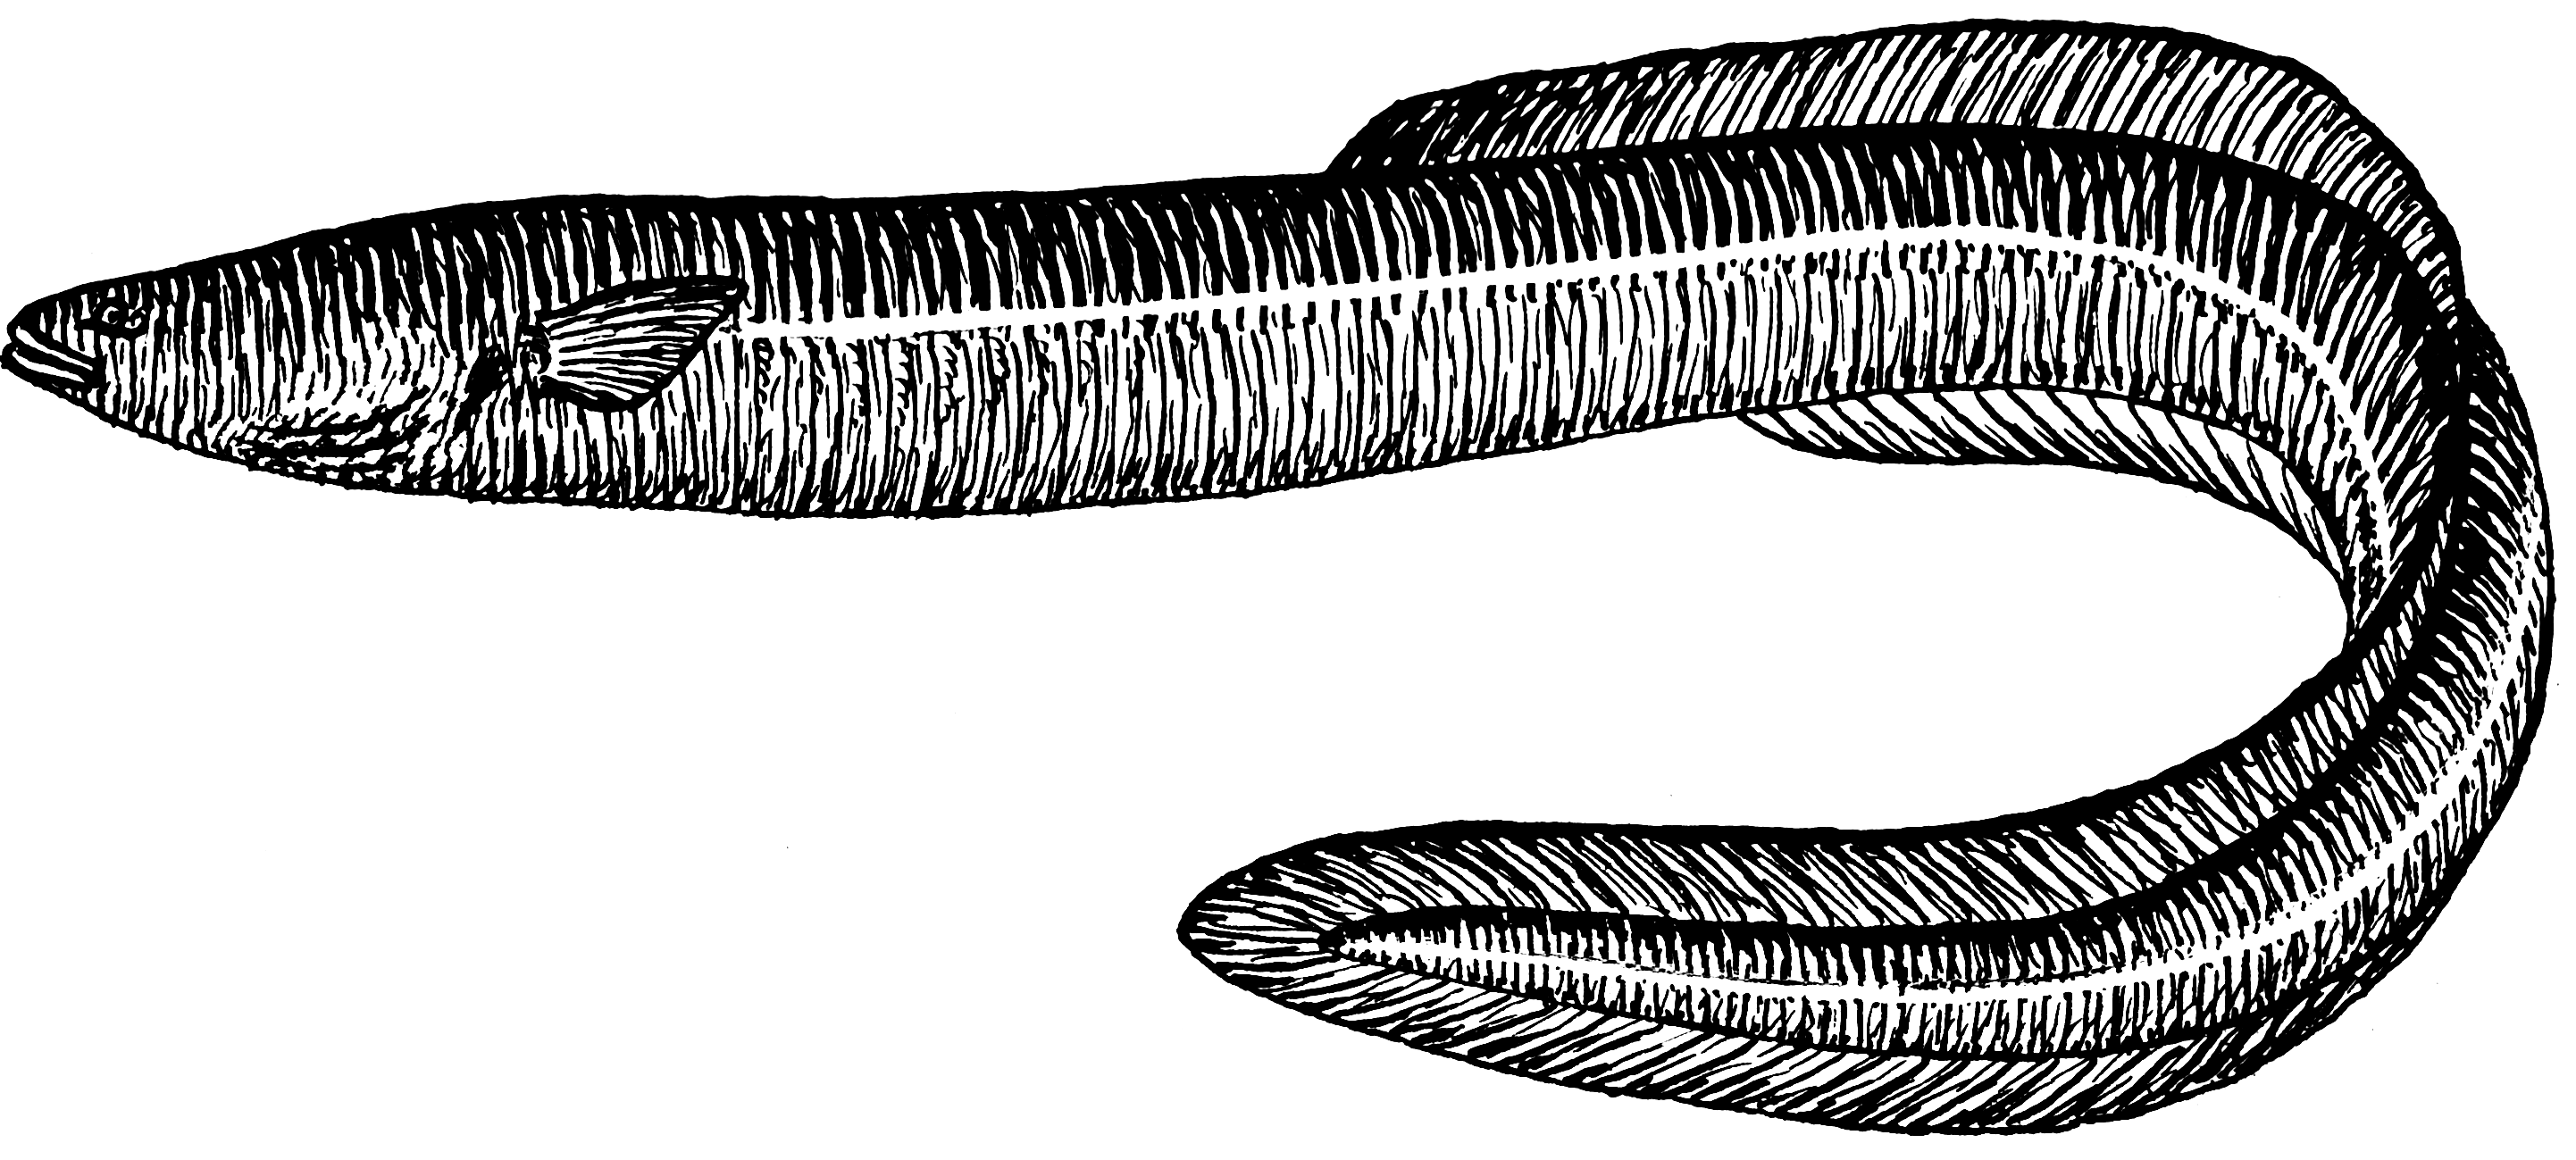 Eel PNG Black And White - 144792